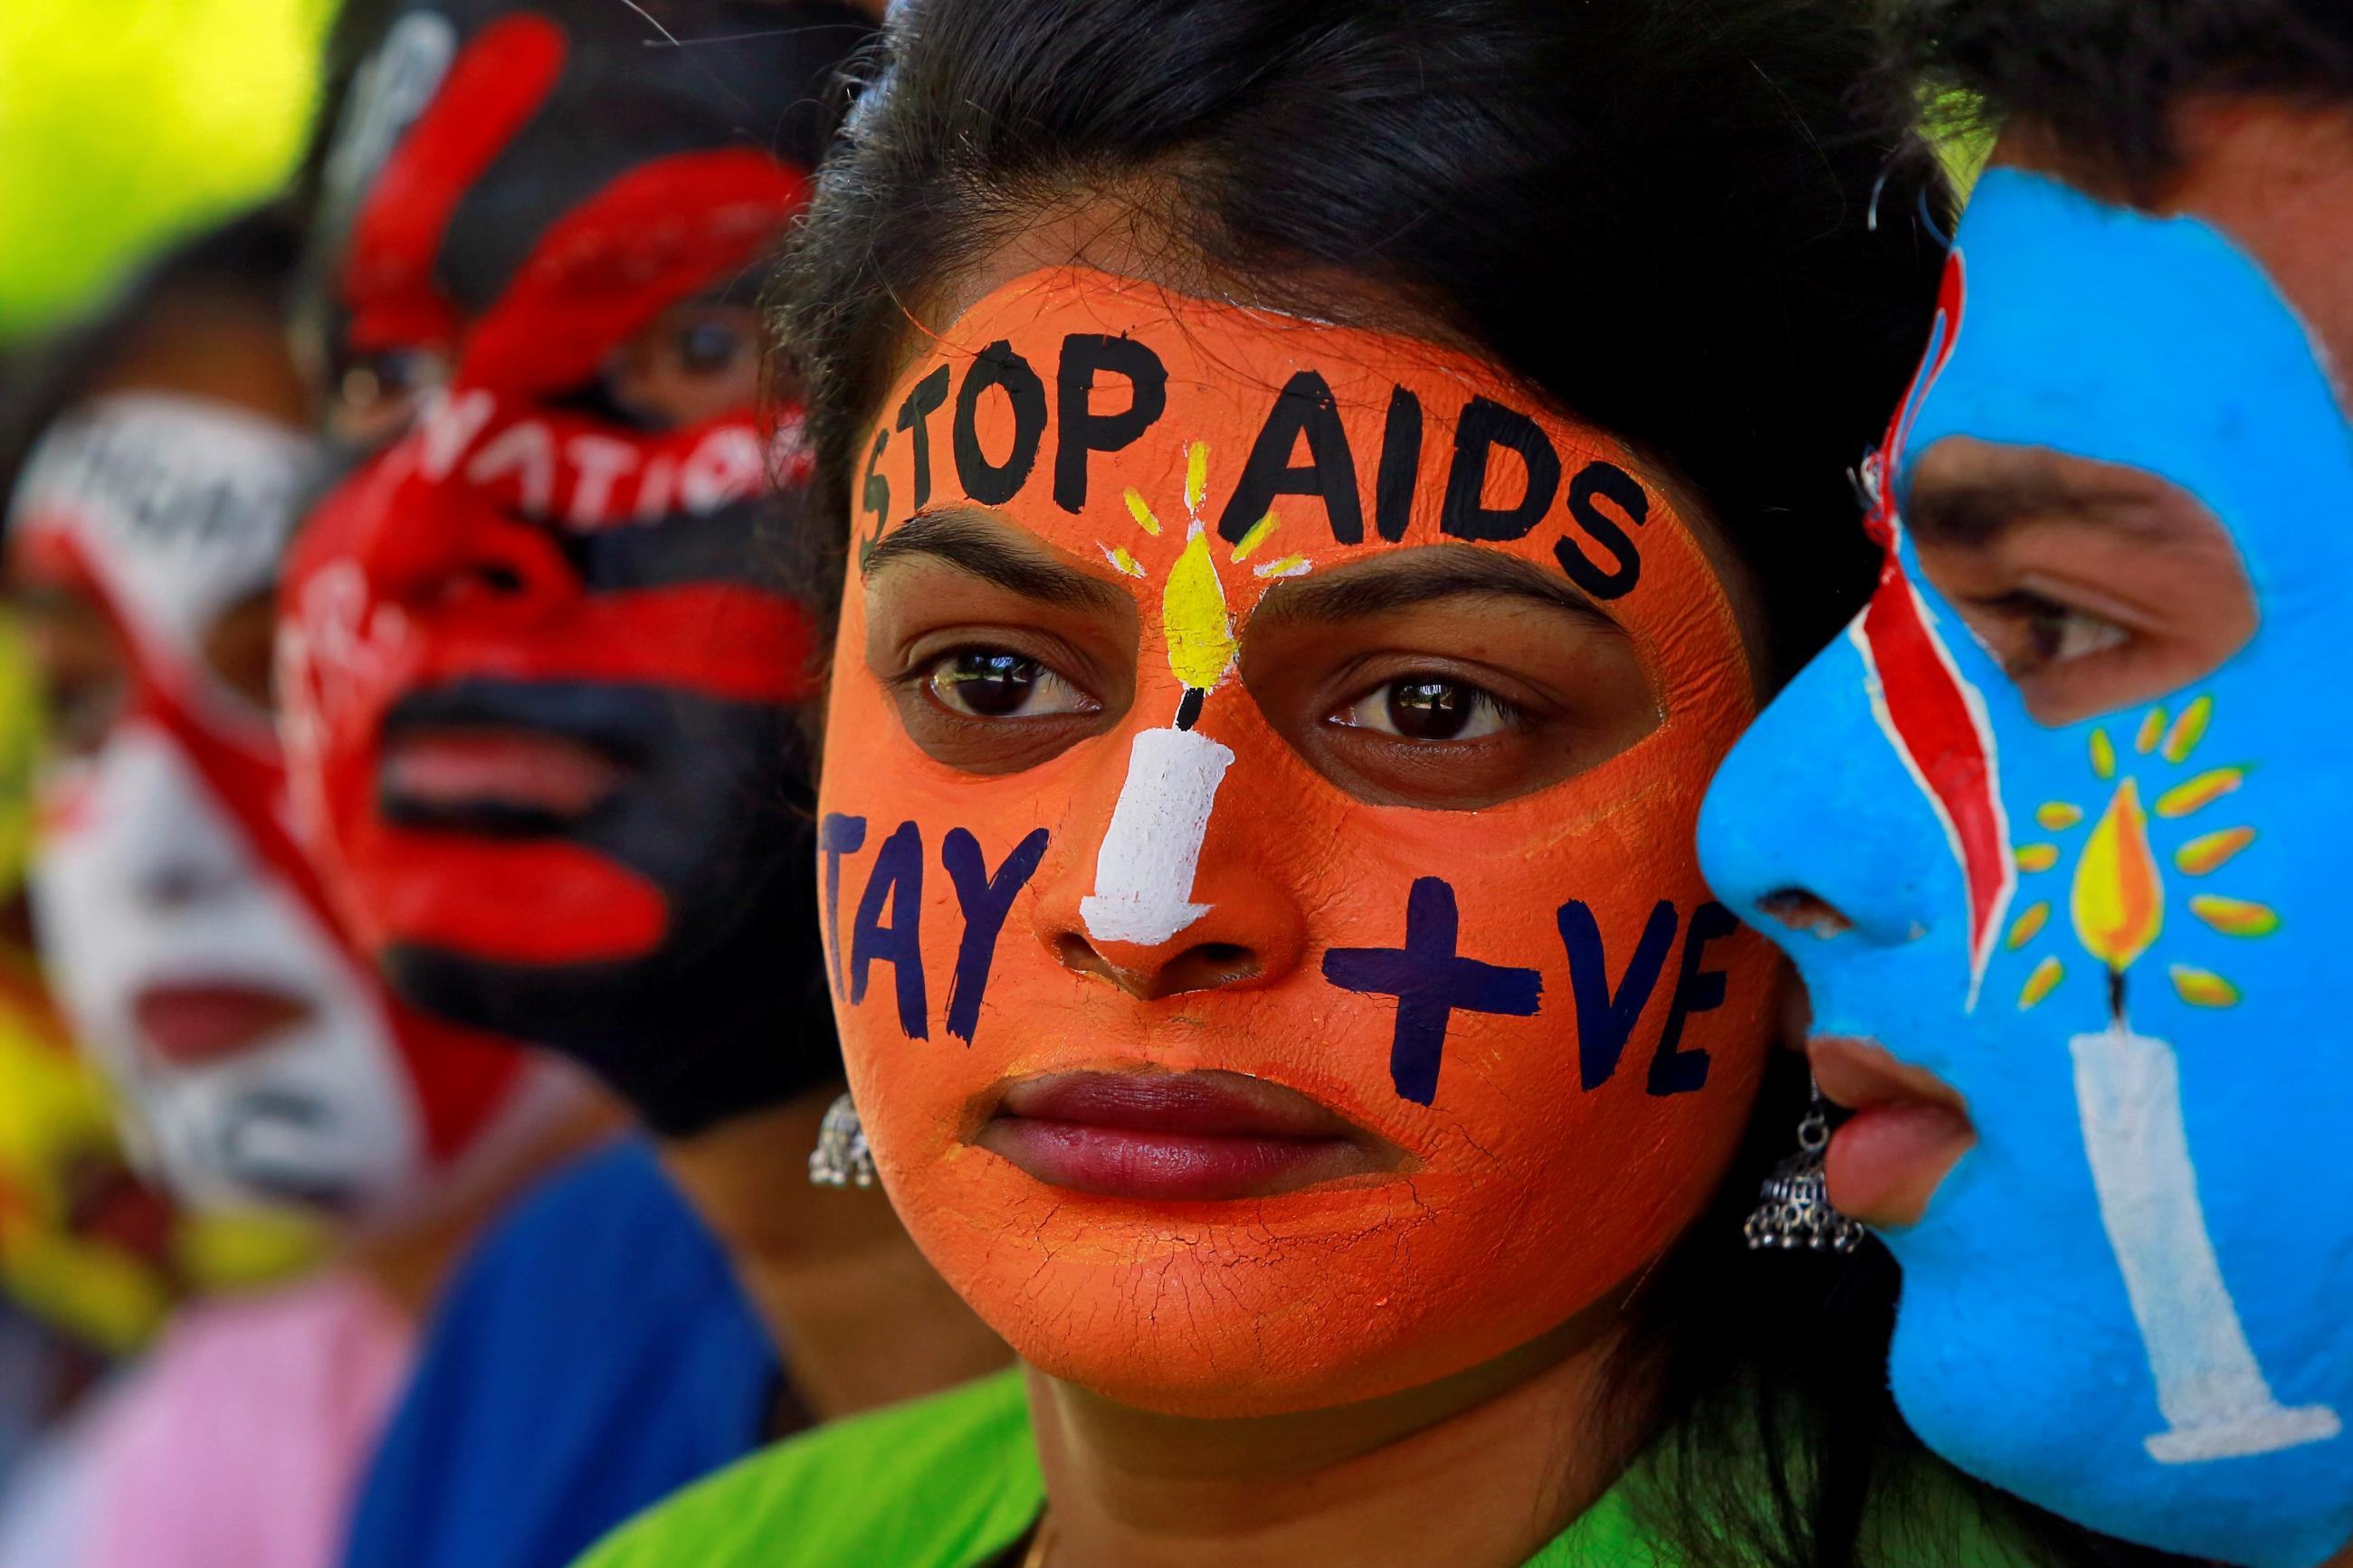 Students wear bright orange and blue face paint at an HIV/AIDS awareness campaign to mark the International AIDS Candlelight Memorial, in Chandigarh, India, on May 20, 2018. 